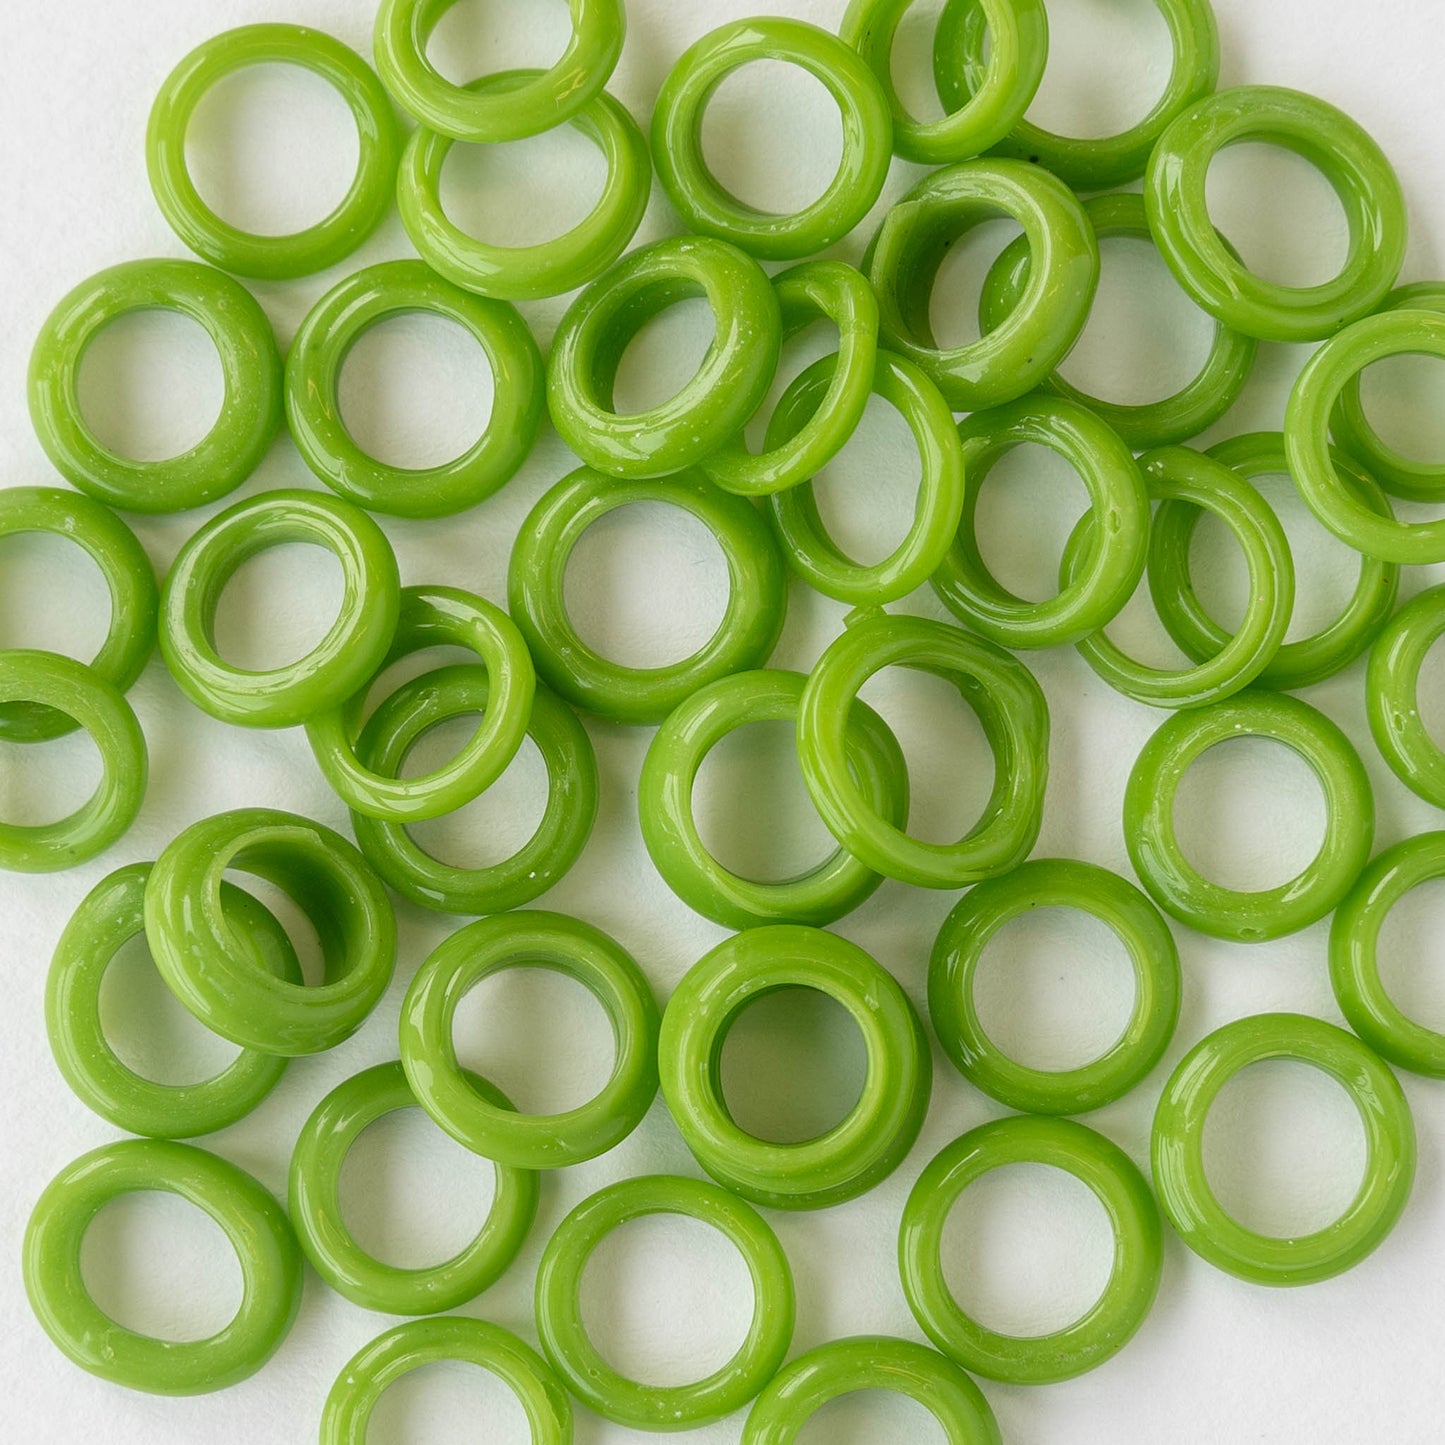 Handmade Glass Rings From Venice Italy  - Opaque Spring Green - 20 beads